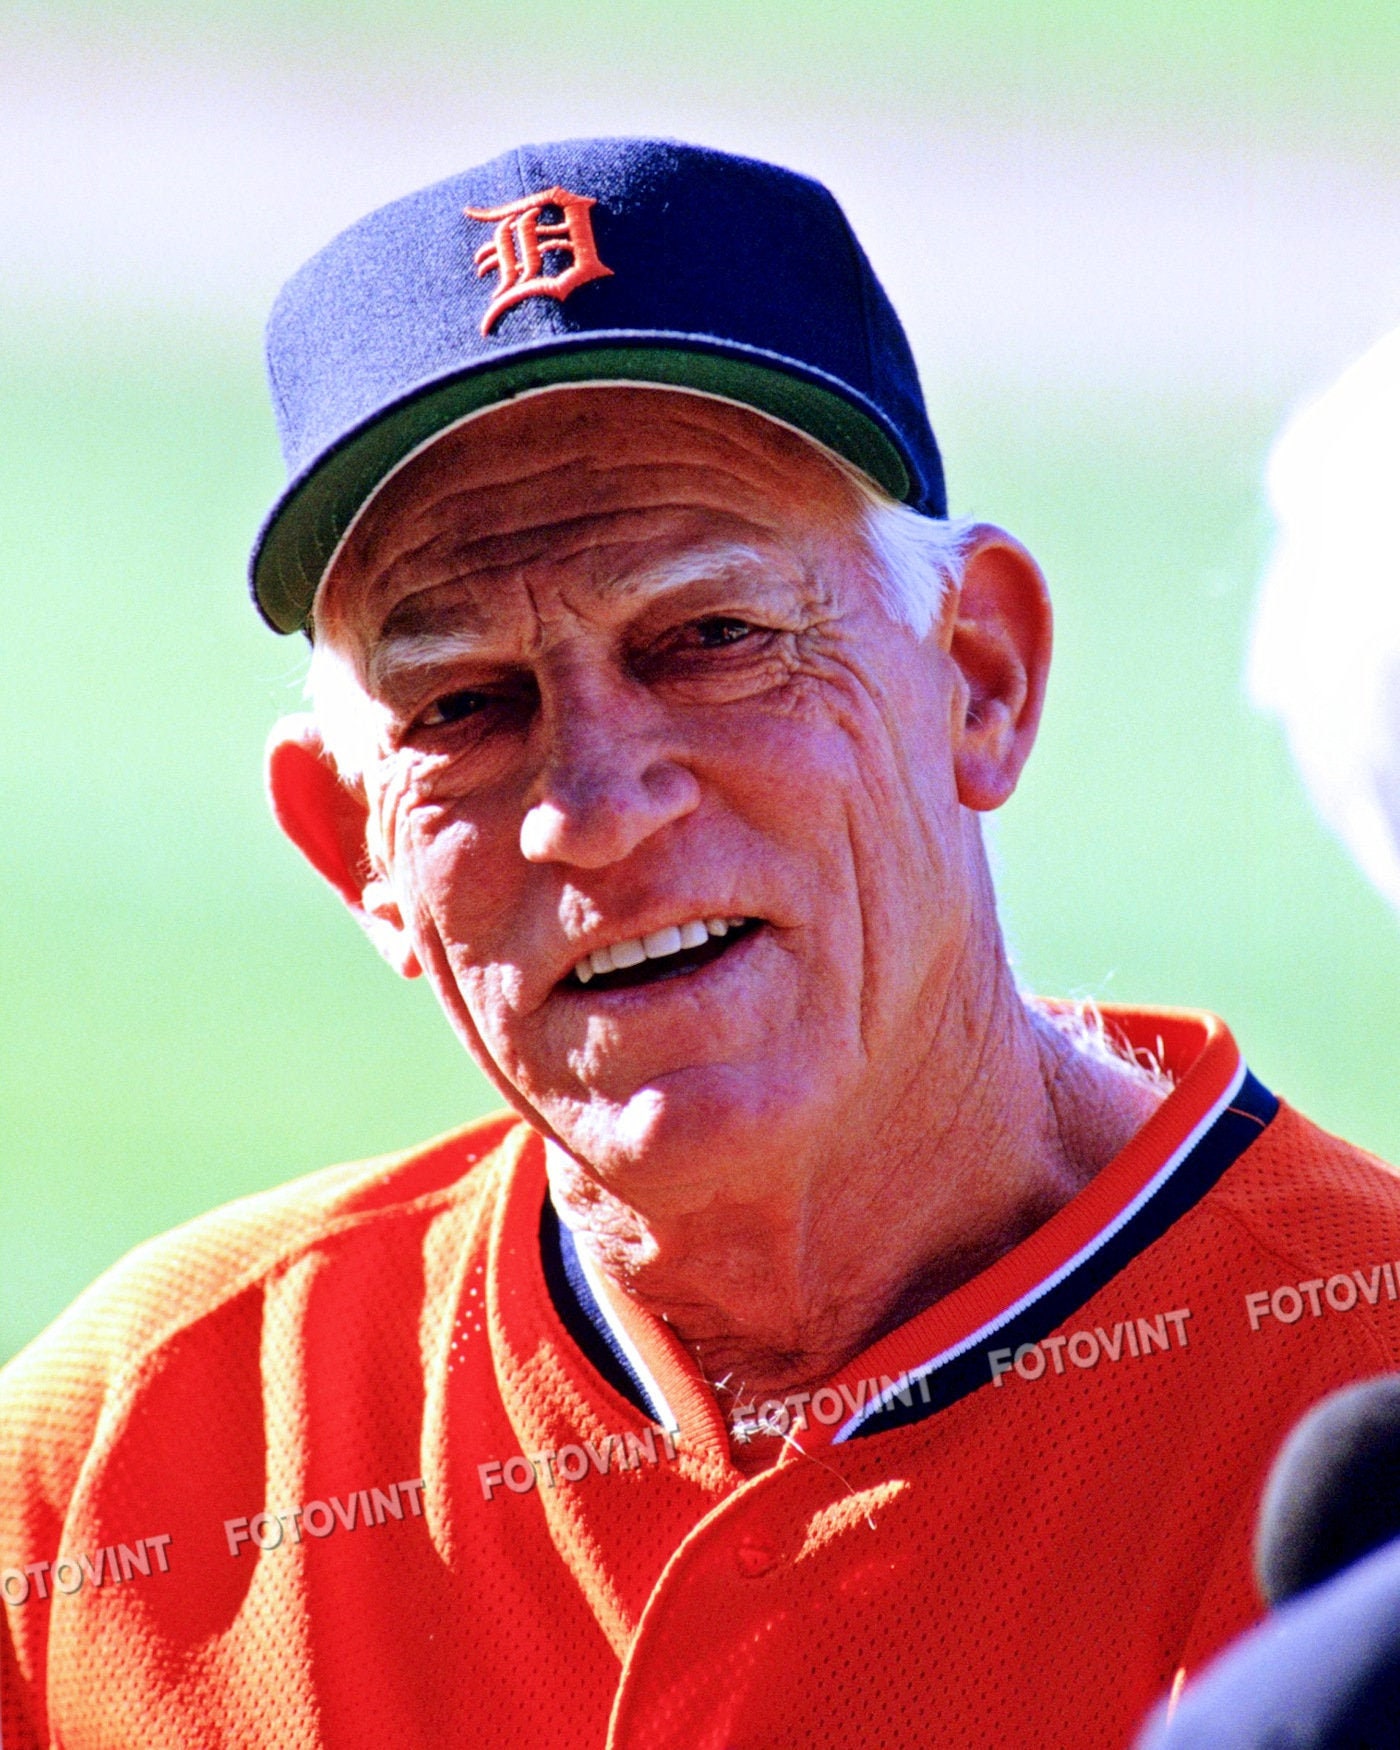 SPARKY ANDERSON Photo Picture DETROIT Tigers Baseball Photograph Print  8x10, 8.5x11 or 11x14 (SA1)